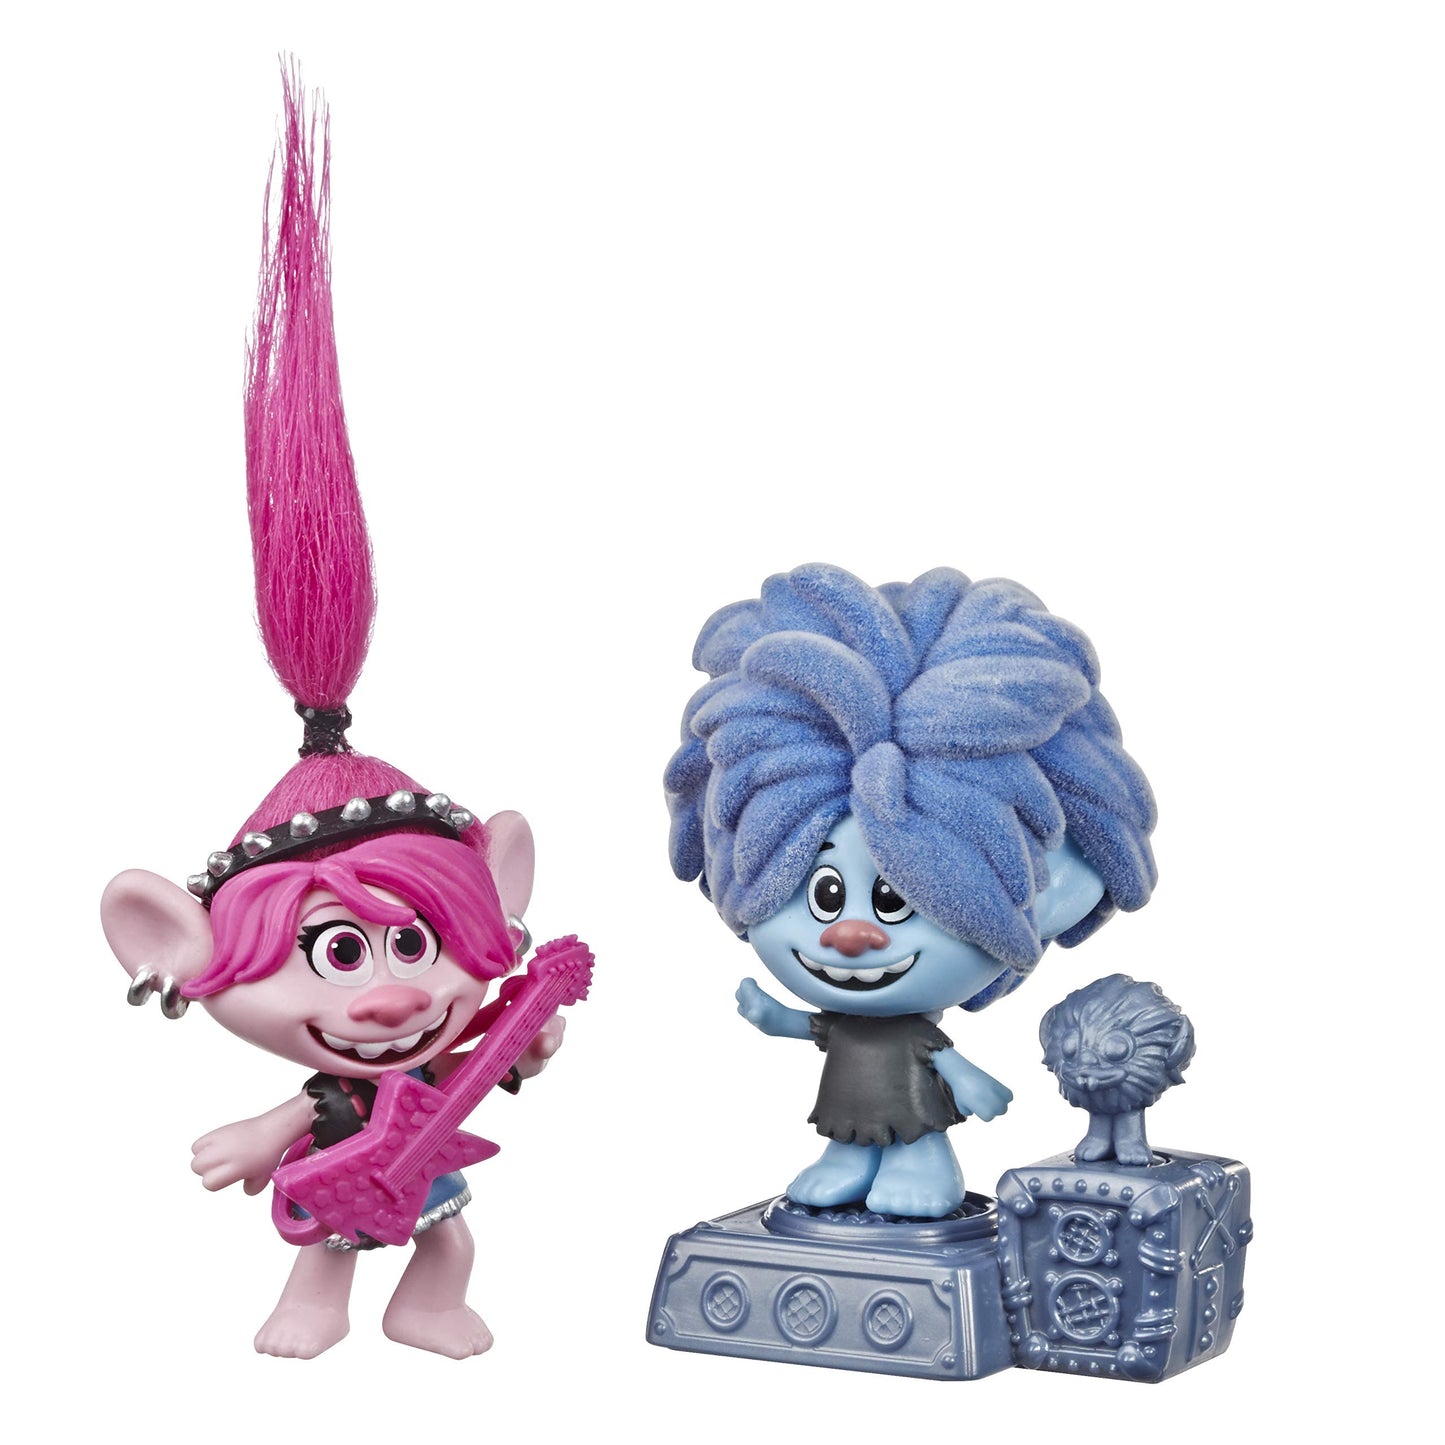 Trolls DreamWorks World Tour Rock City Bobble with 2 Figures, 1 with Bobble Action Plus Base, Toy Inspired by The Movie World Tour